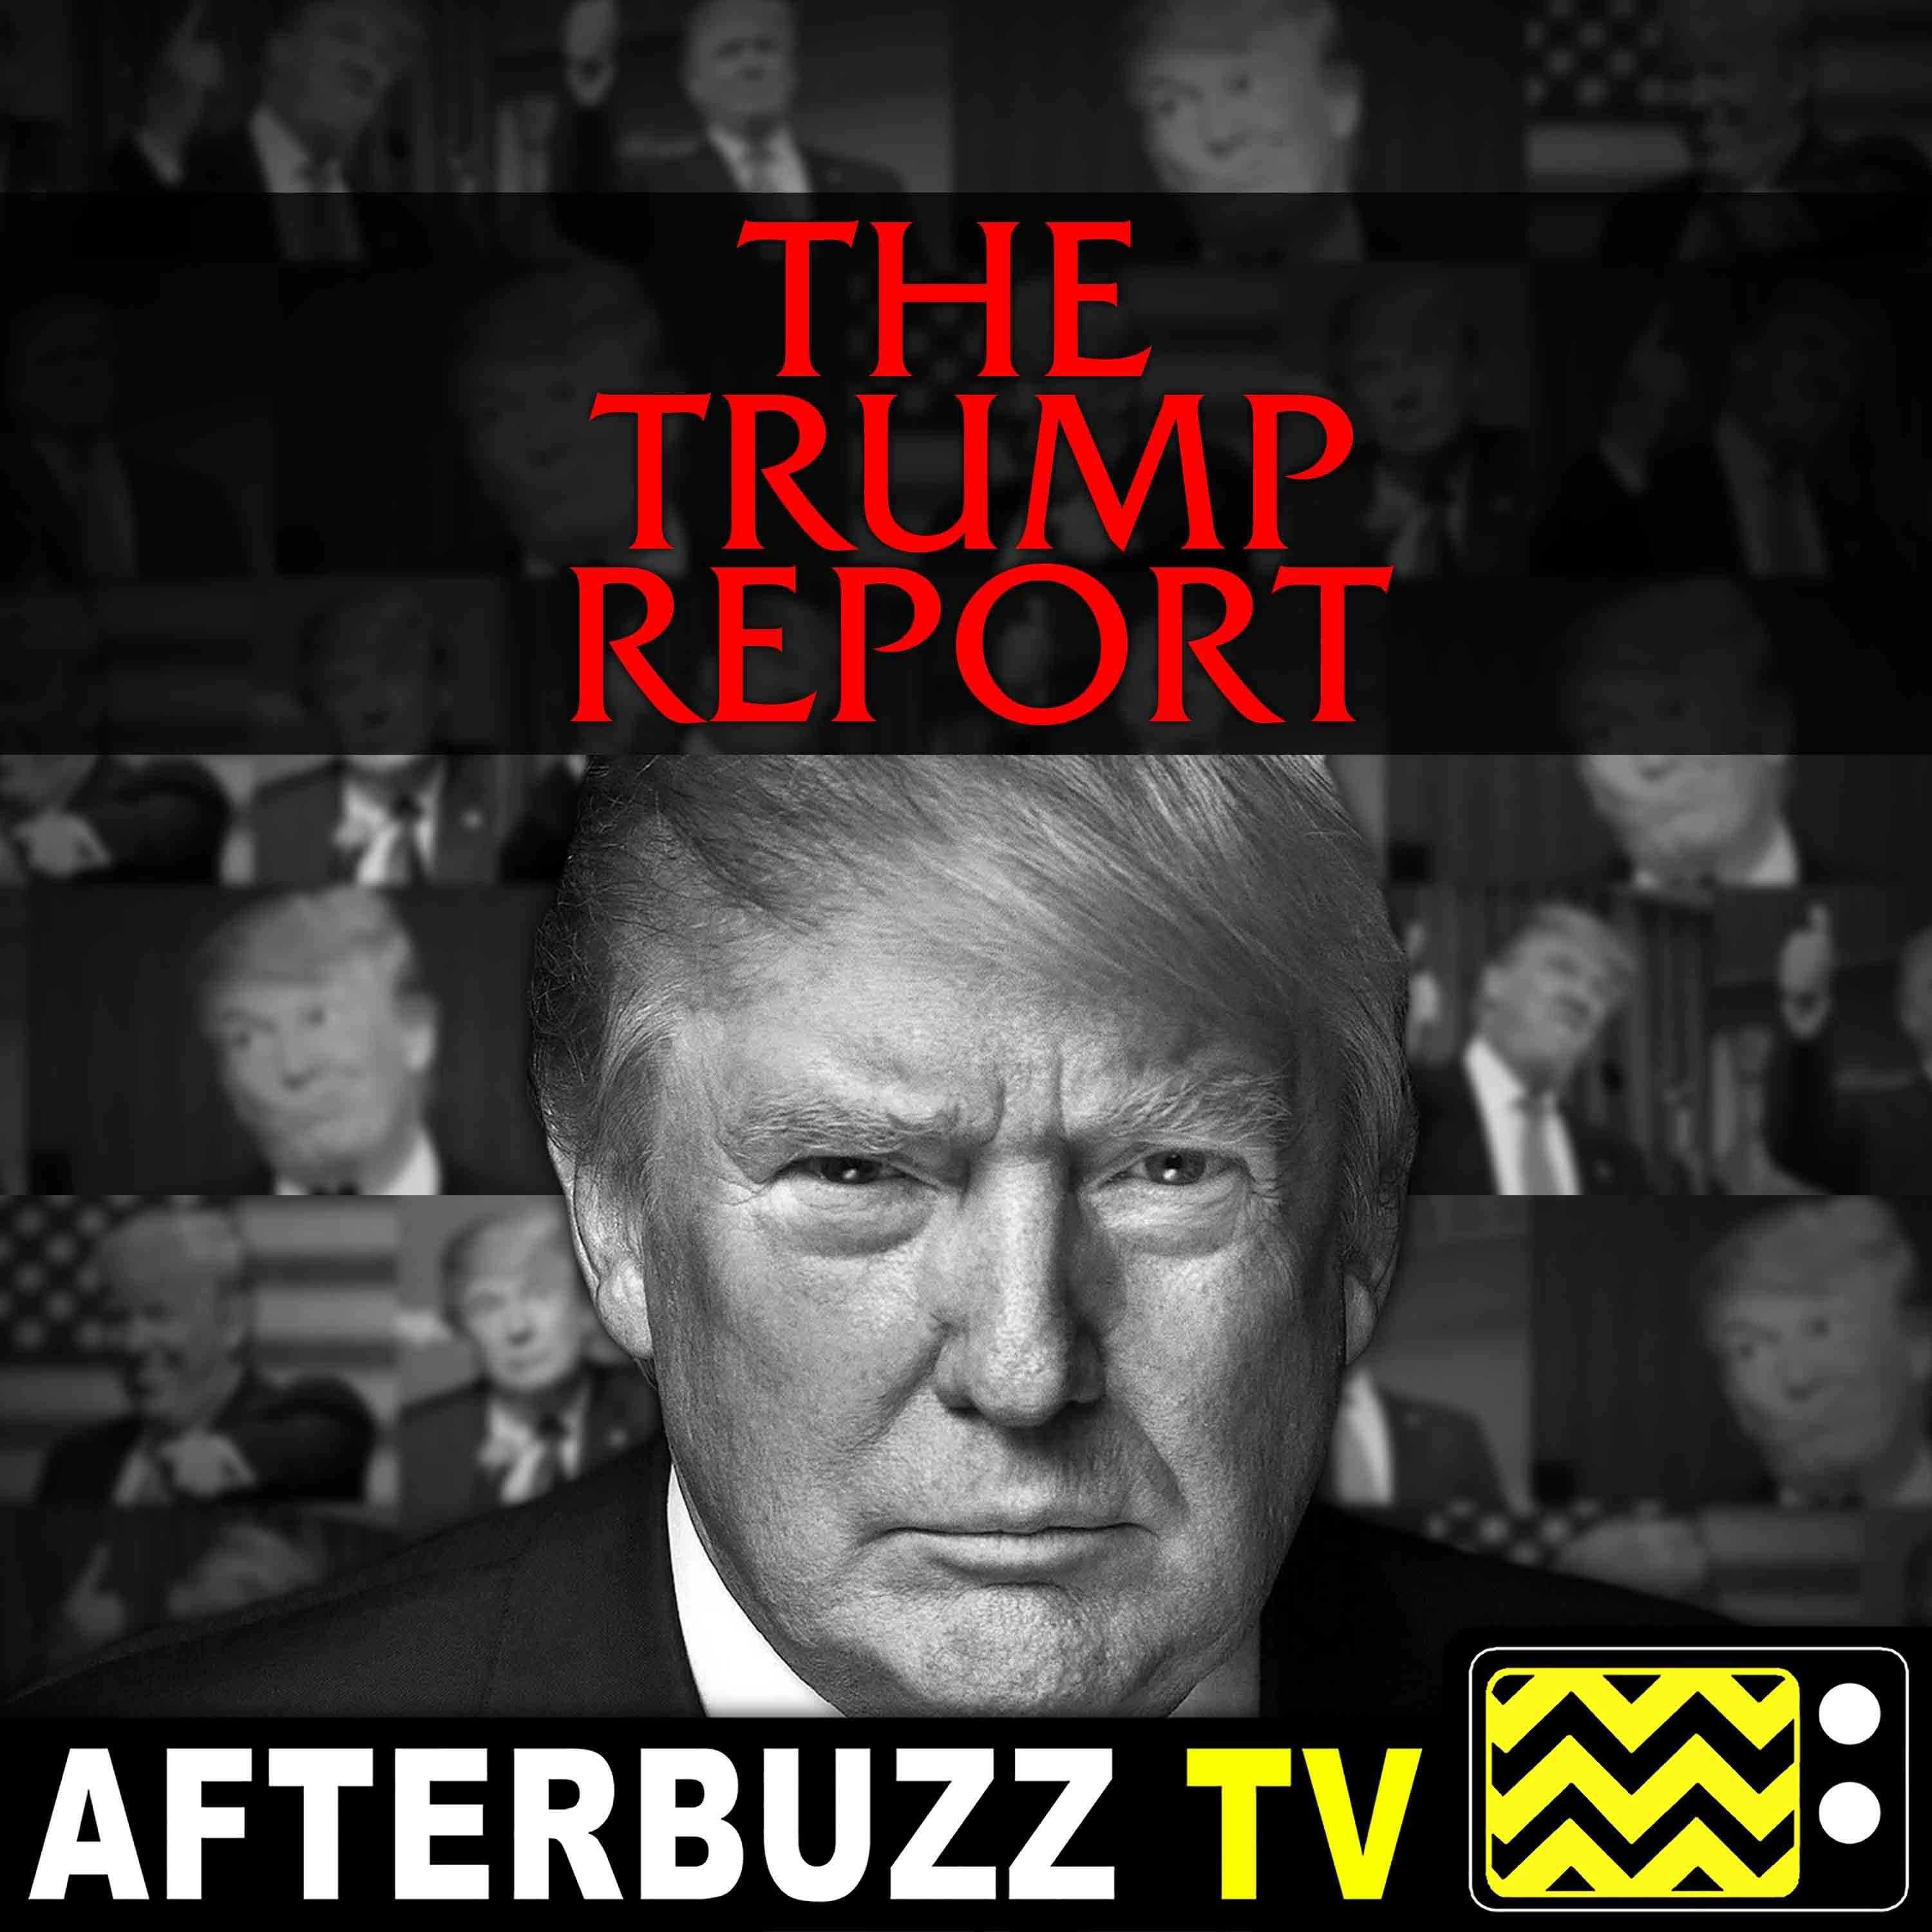 The Trump Report | Make The USSR Great Again | AfterBuzz TV